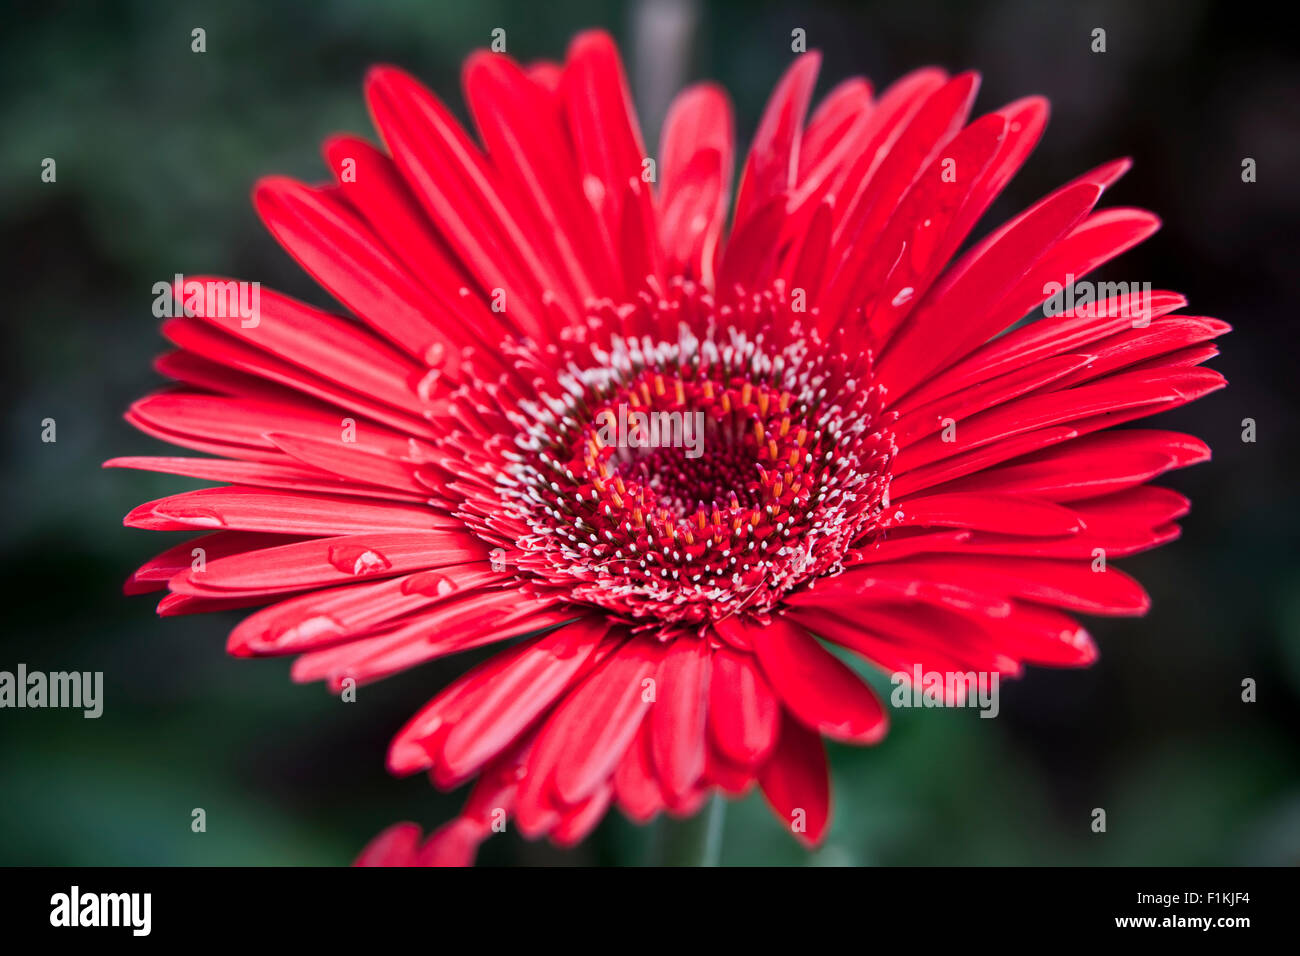 Bright Red Osteospermum, or Asteraceae Family of Flower better known as a African Daisy Stock Photo